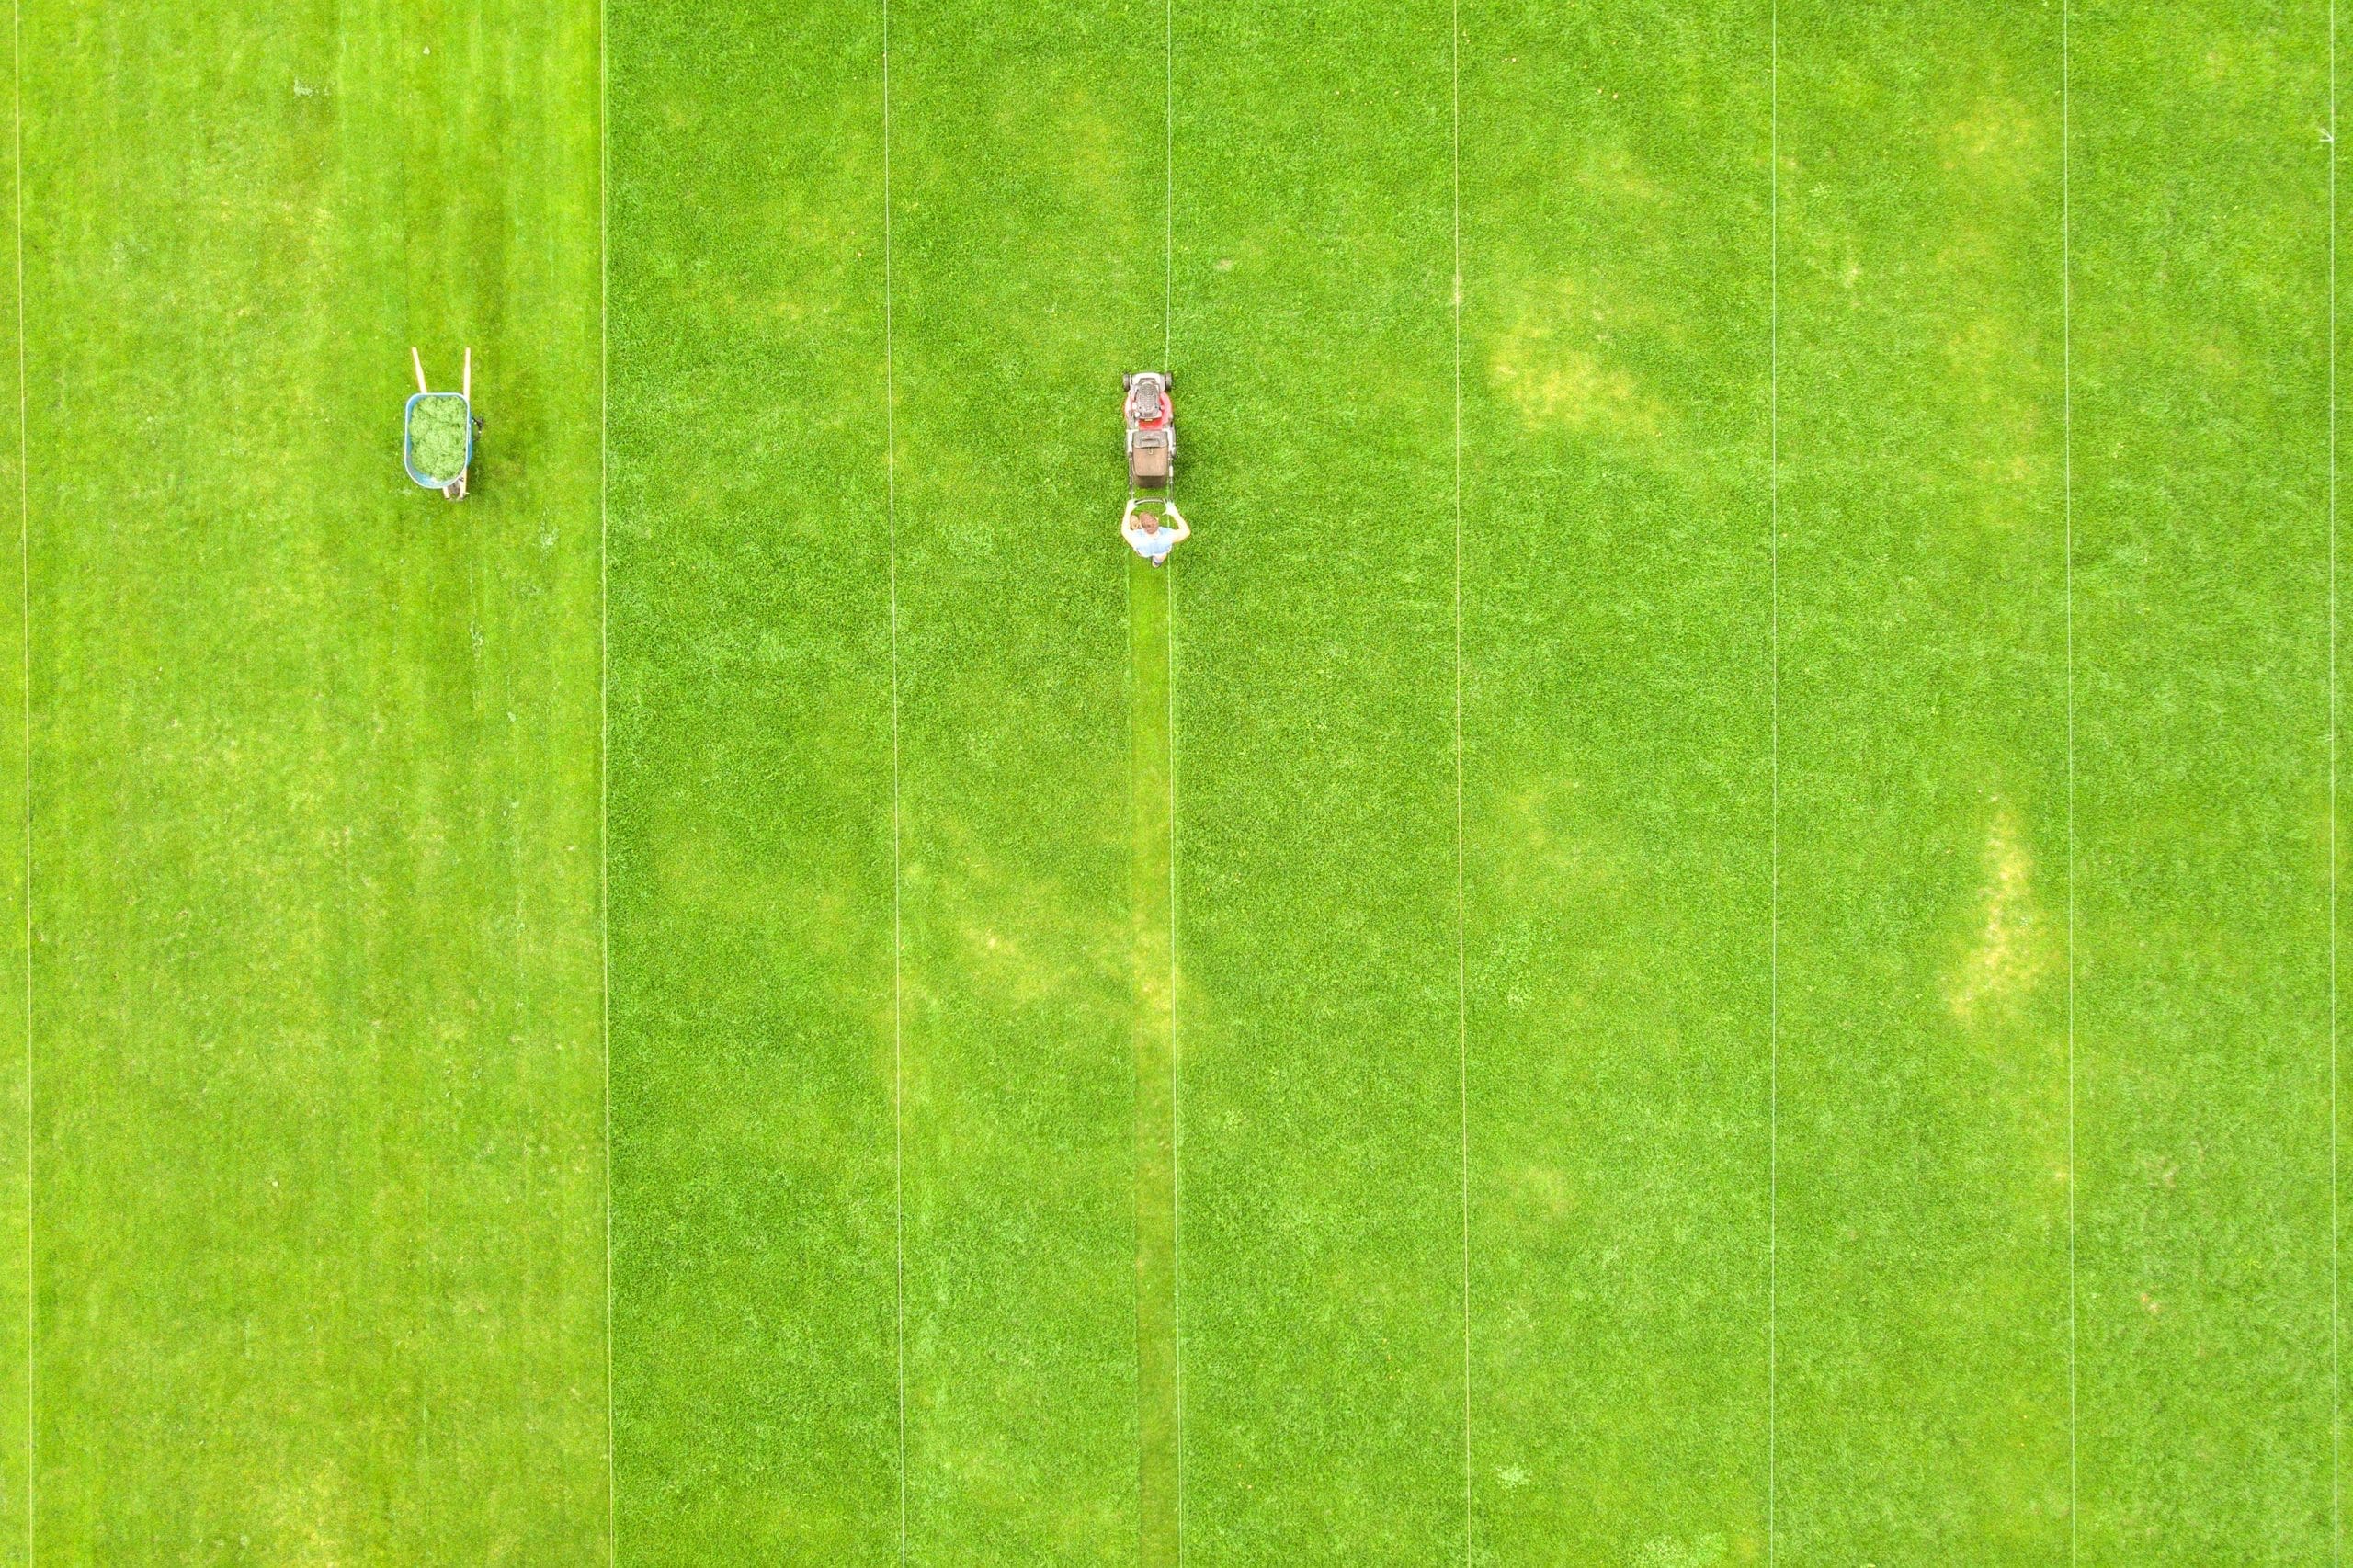 Aerial view of small figure of man worker trimming green grass with mowing machine on football stadium field in Johnston, RI, in summer.